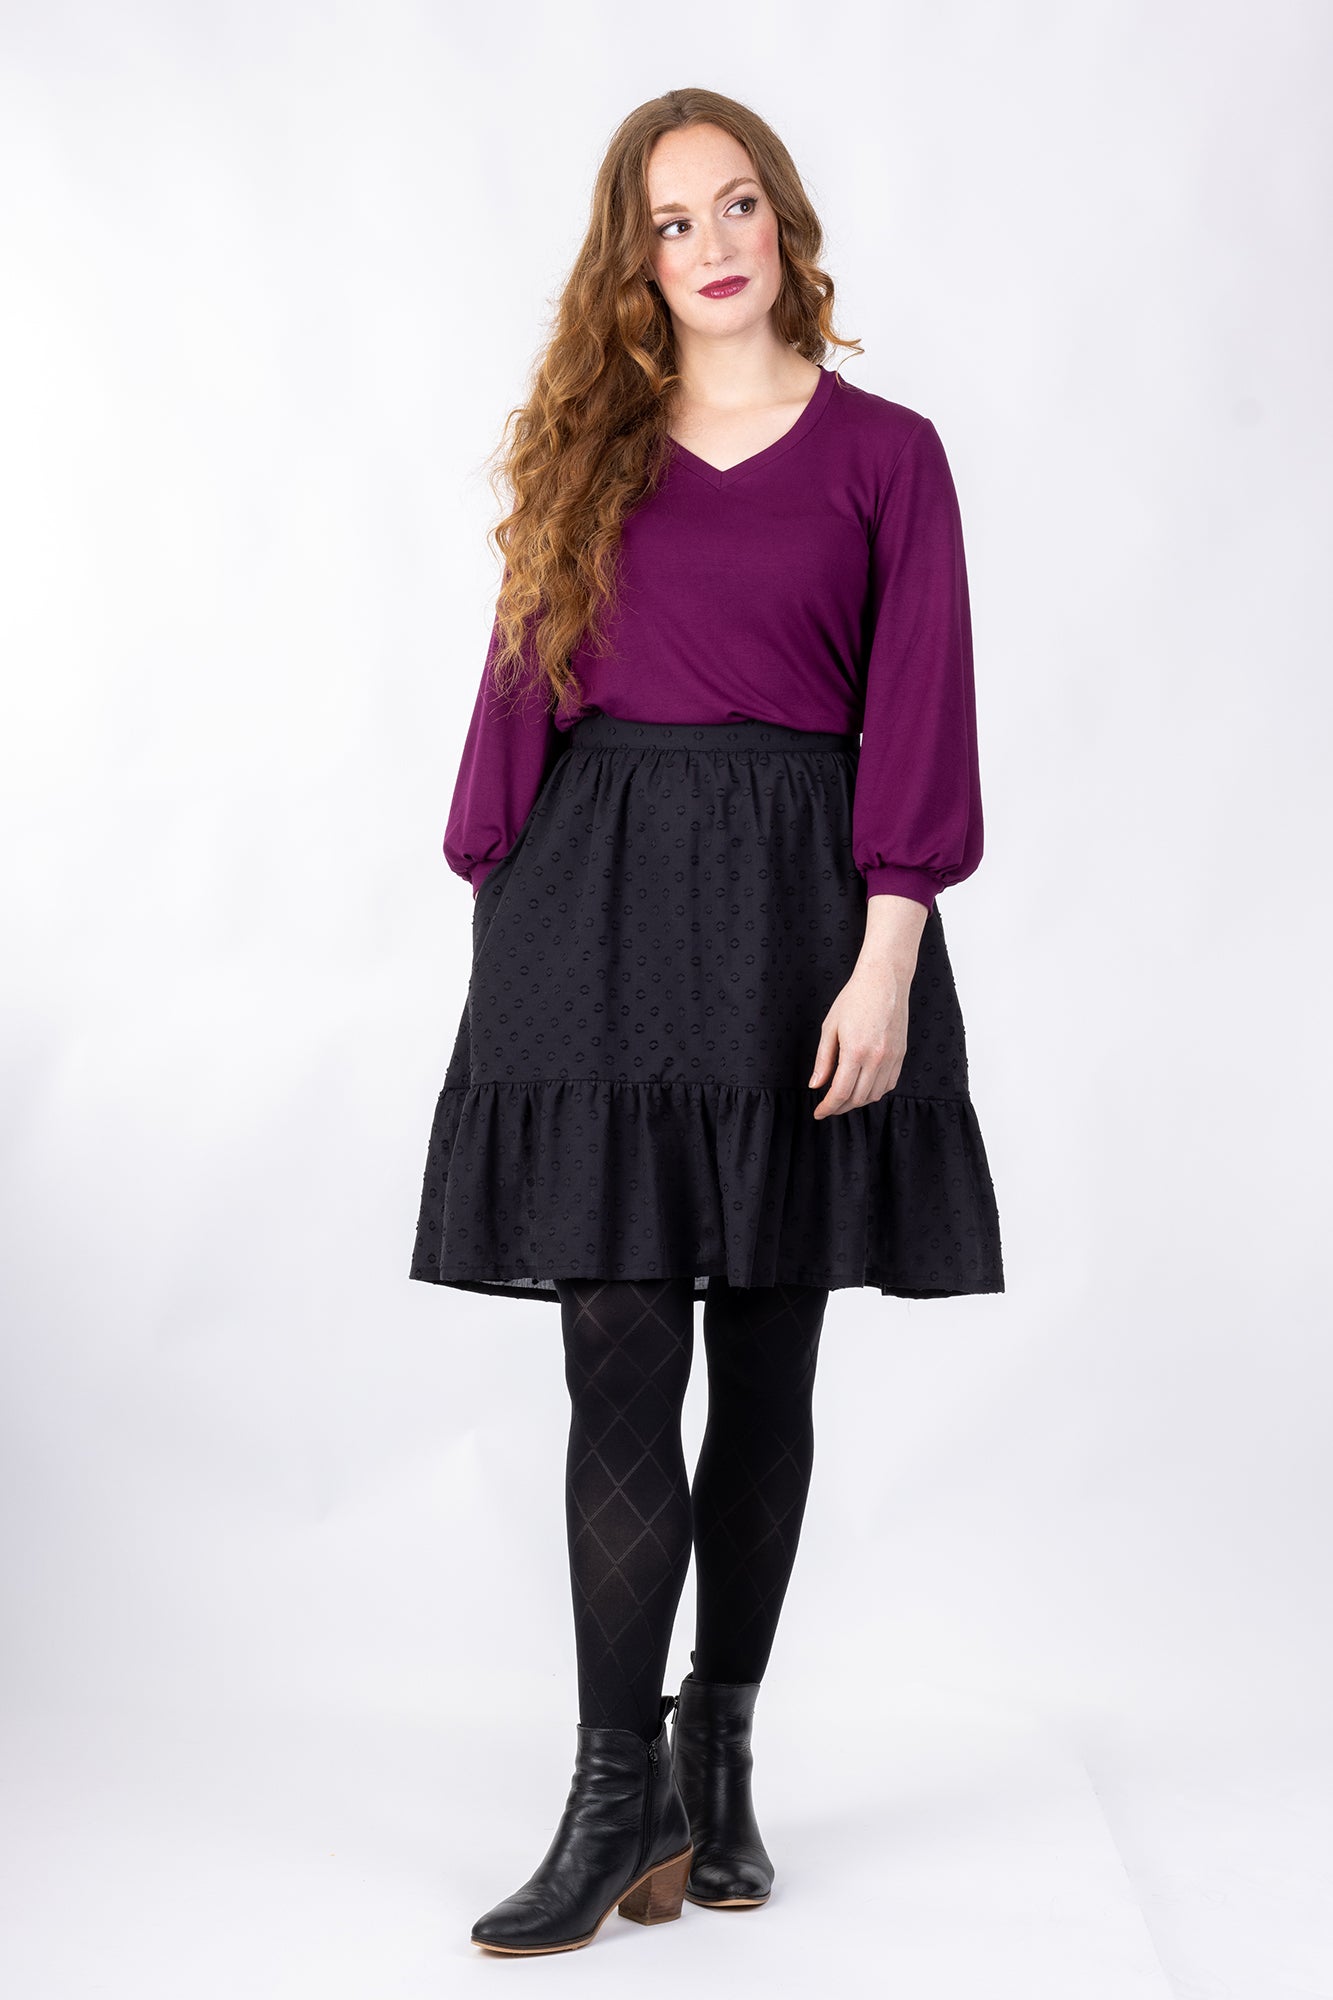 Forget-Me-Not Vera three-quarter gathered sleeve knit top pattern in magenta, full front view